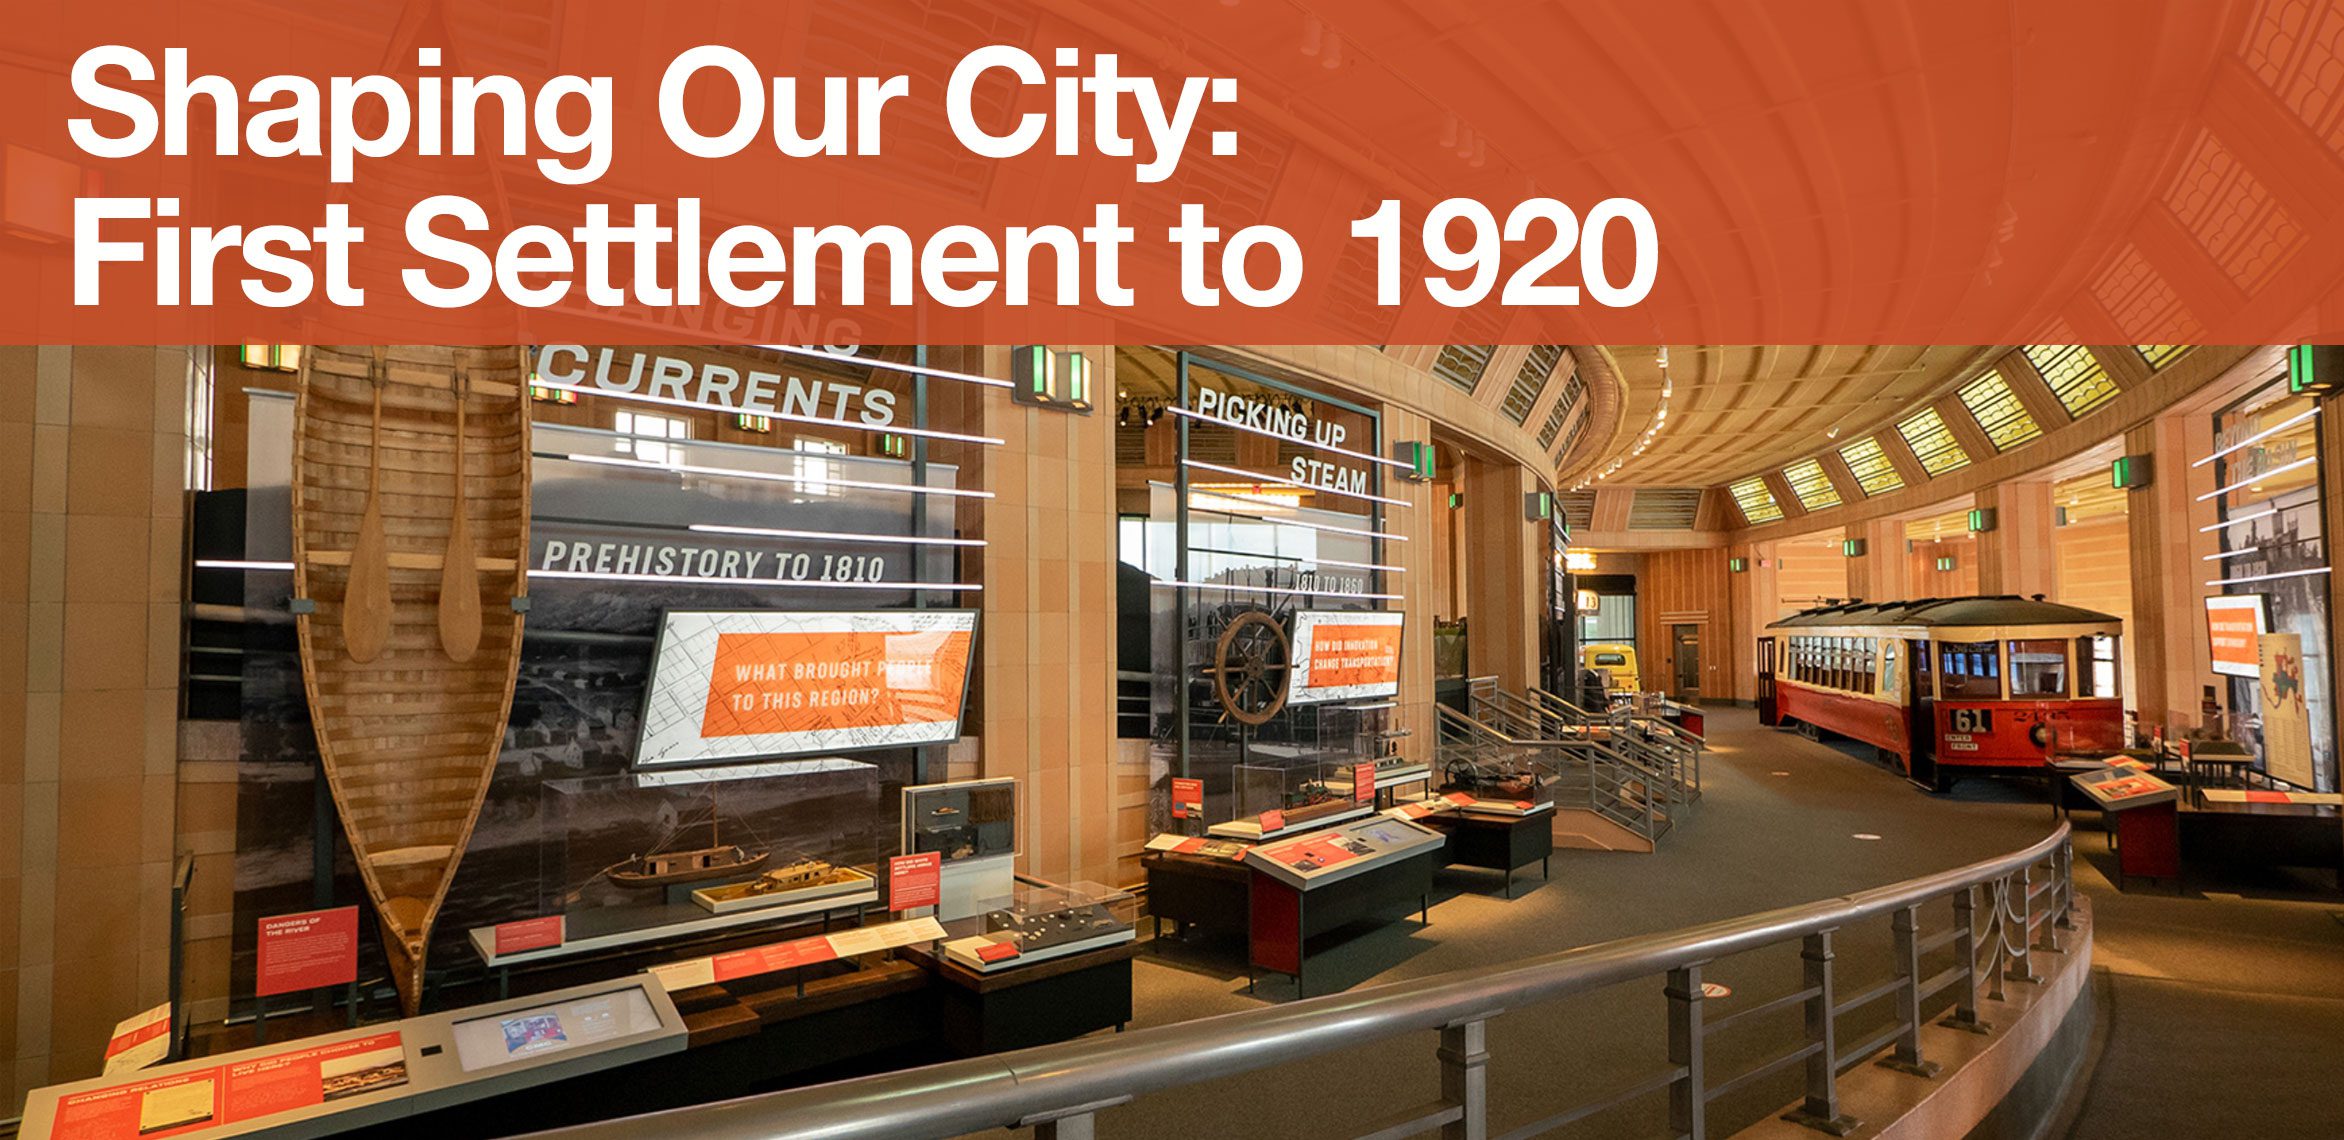 Shaping Our City: First Settlement to 1920